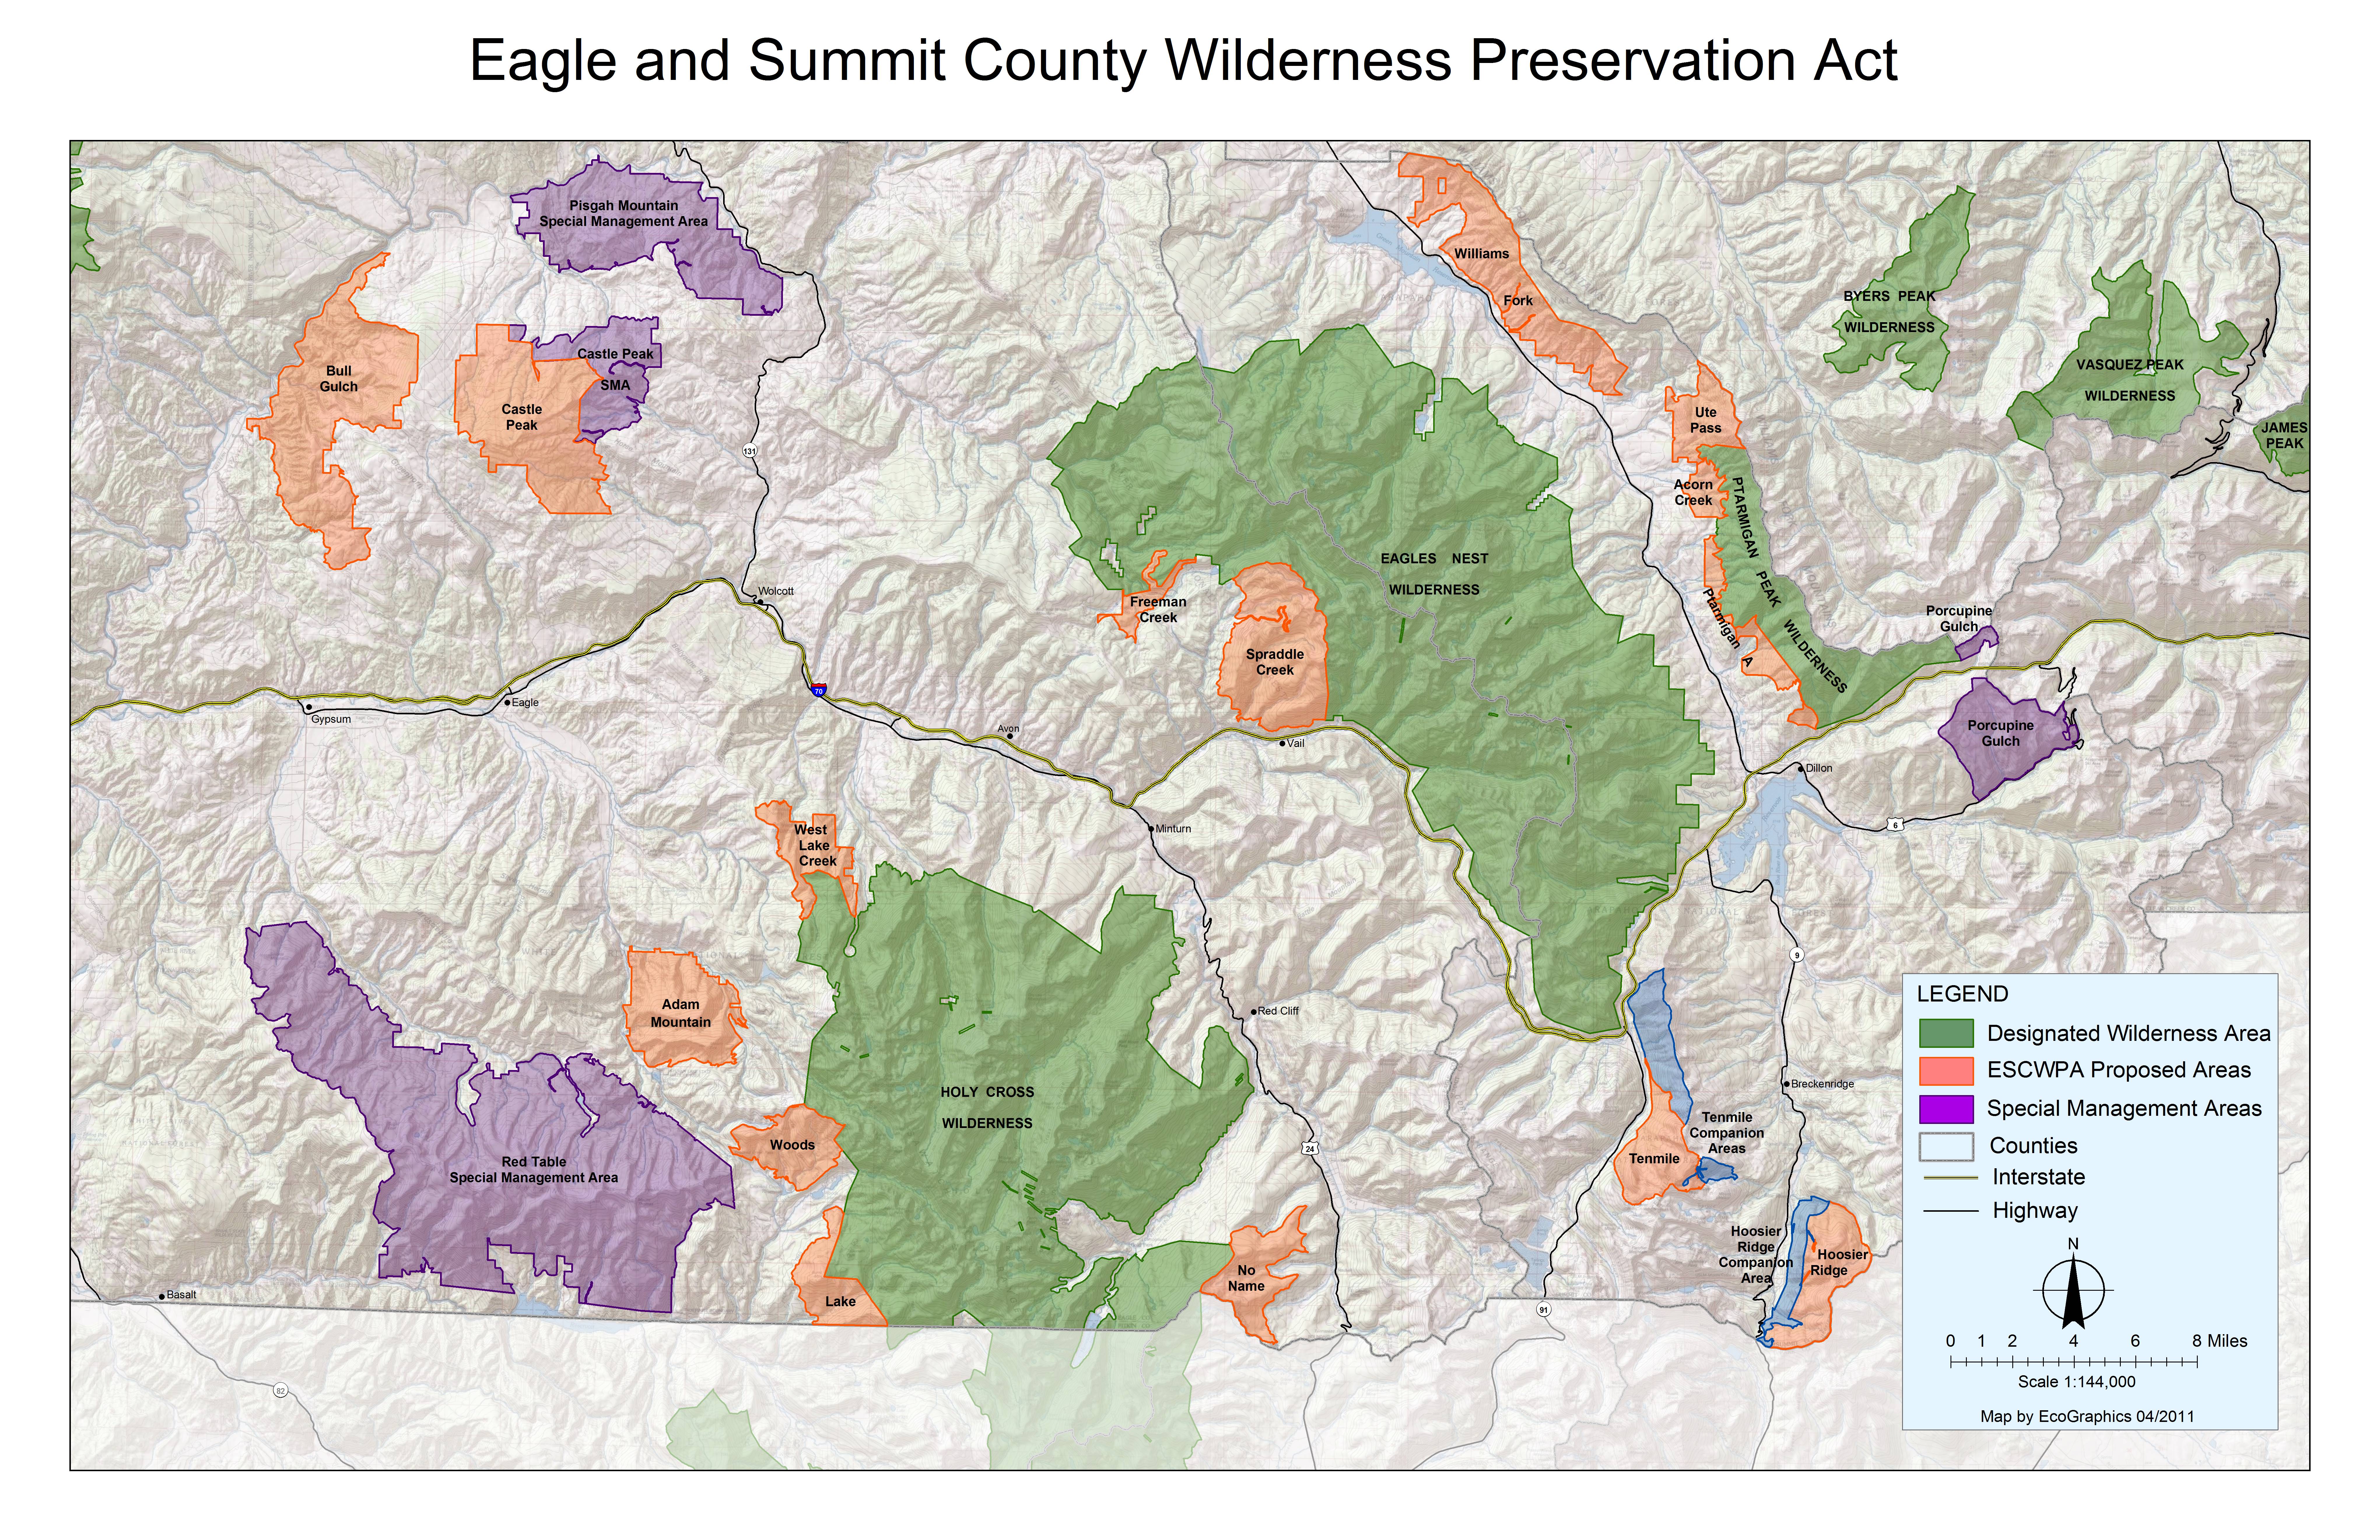 Eagle and Summit County Wilderness Preservation Area